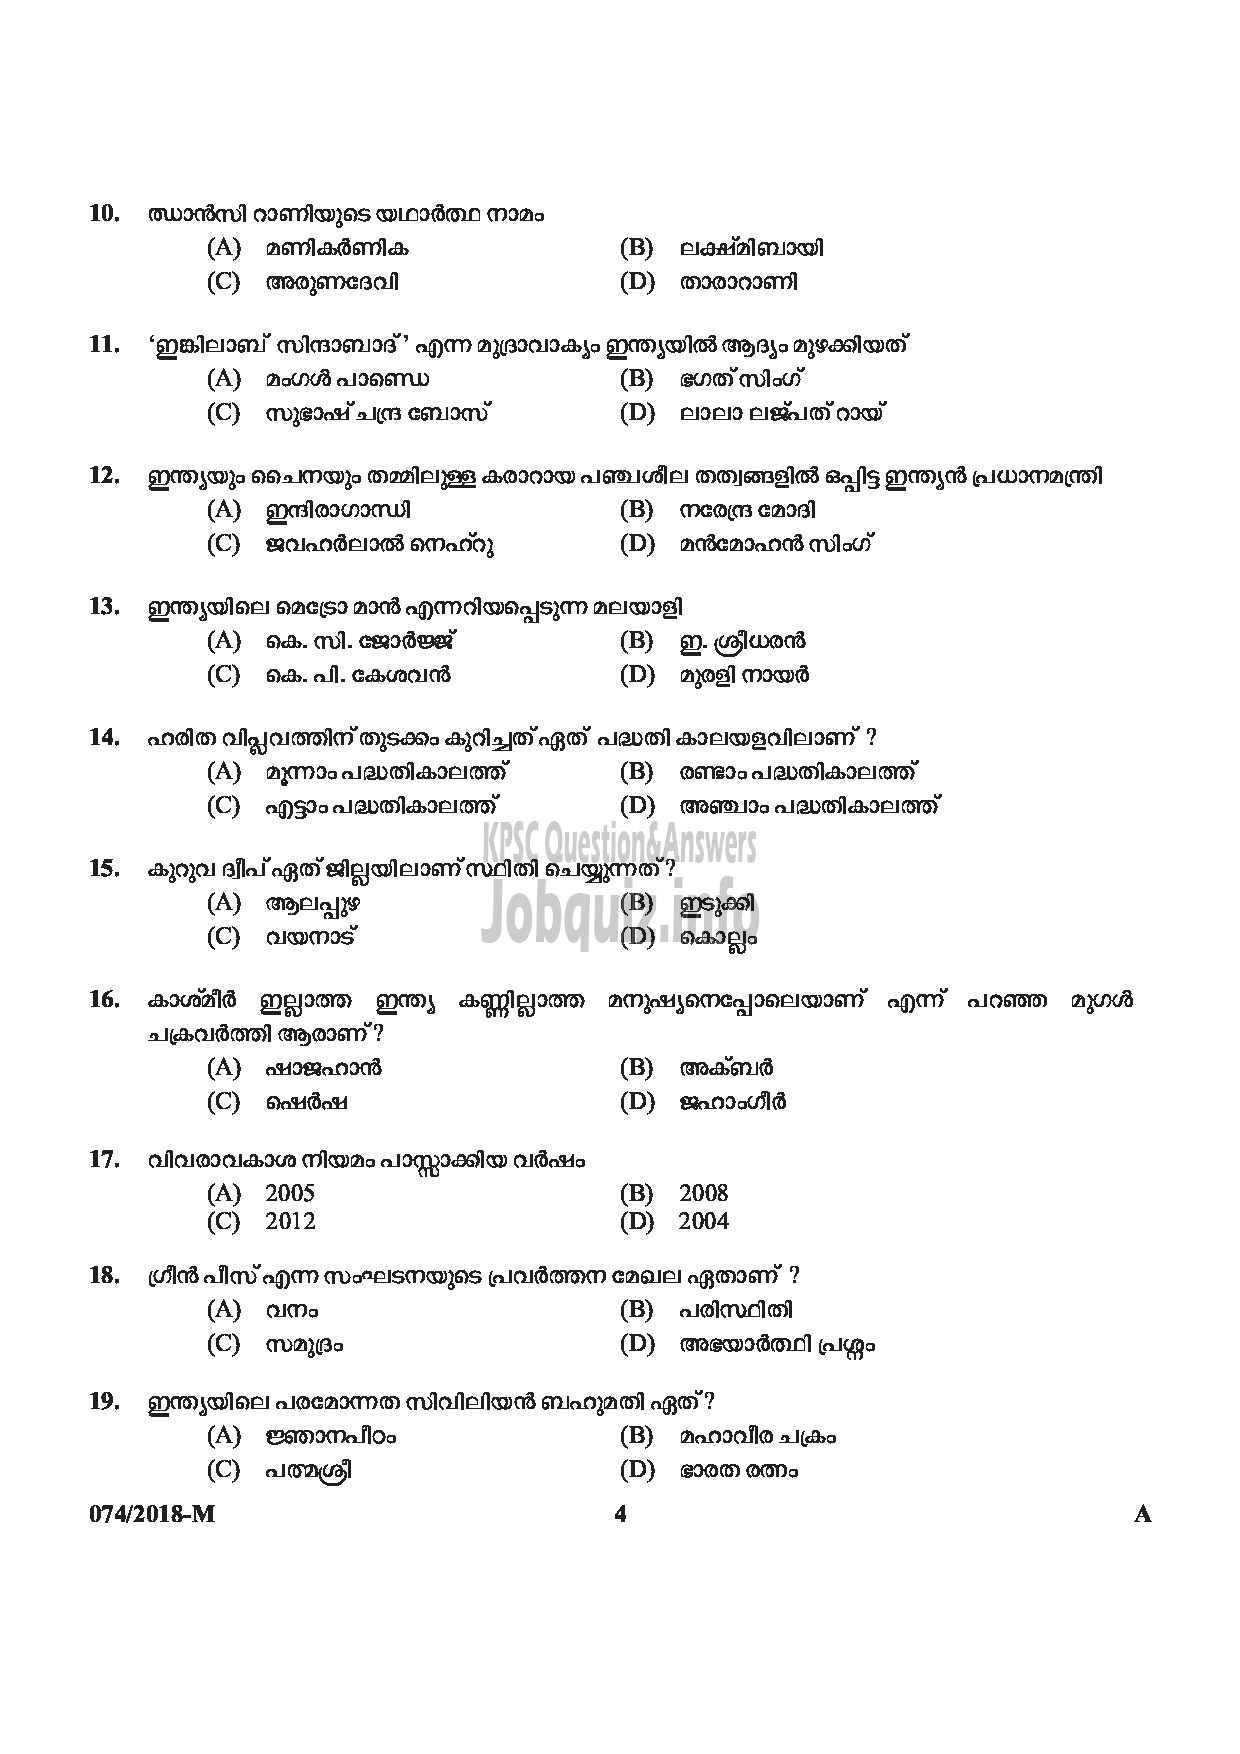 Kerala PSC Question Paper - POLICE CONSTABLE DRIVER ARMED POLICE BATTALION POLICE-4